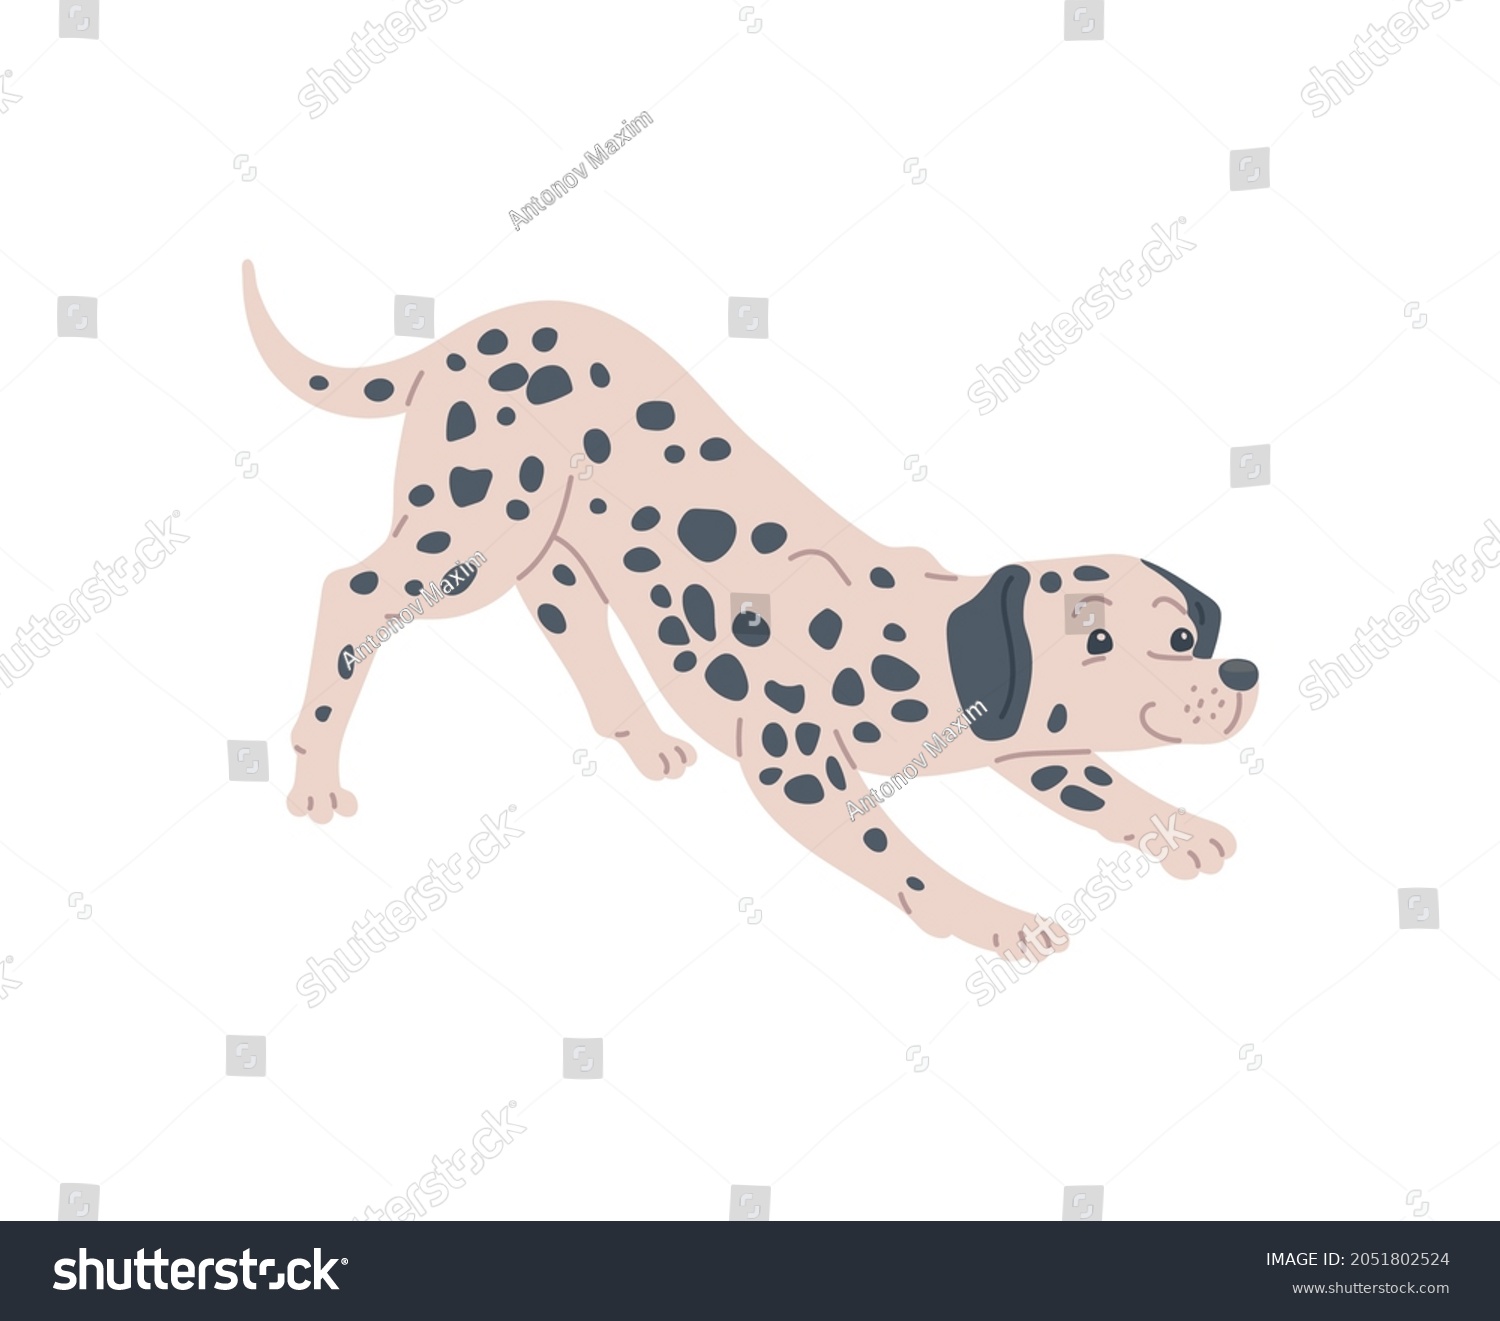 SVG of Dog dalmatian breed with pedigree. Funny cute pet animal in black spots, playful puppy. Flat cartoon vector illustration isolated on a white background. svg